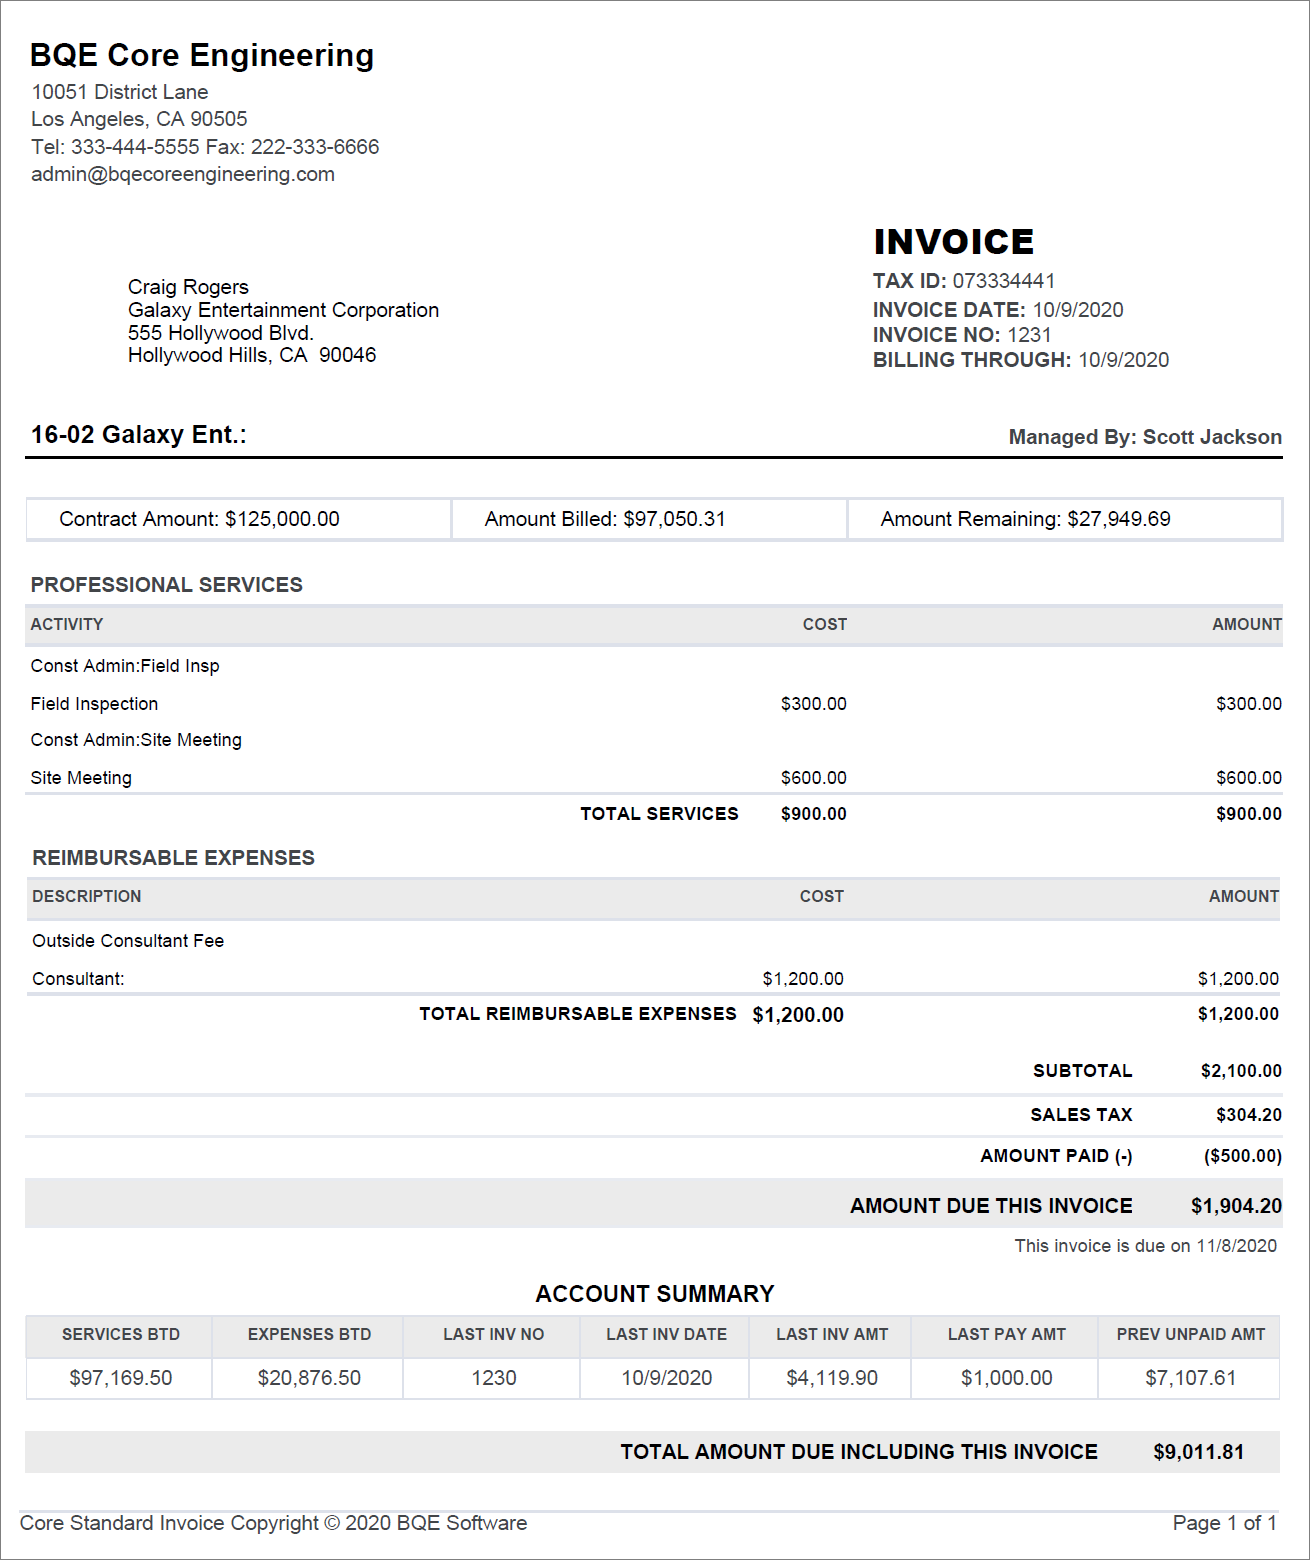 Manual_Invoice_with_Contract_Summary.png